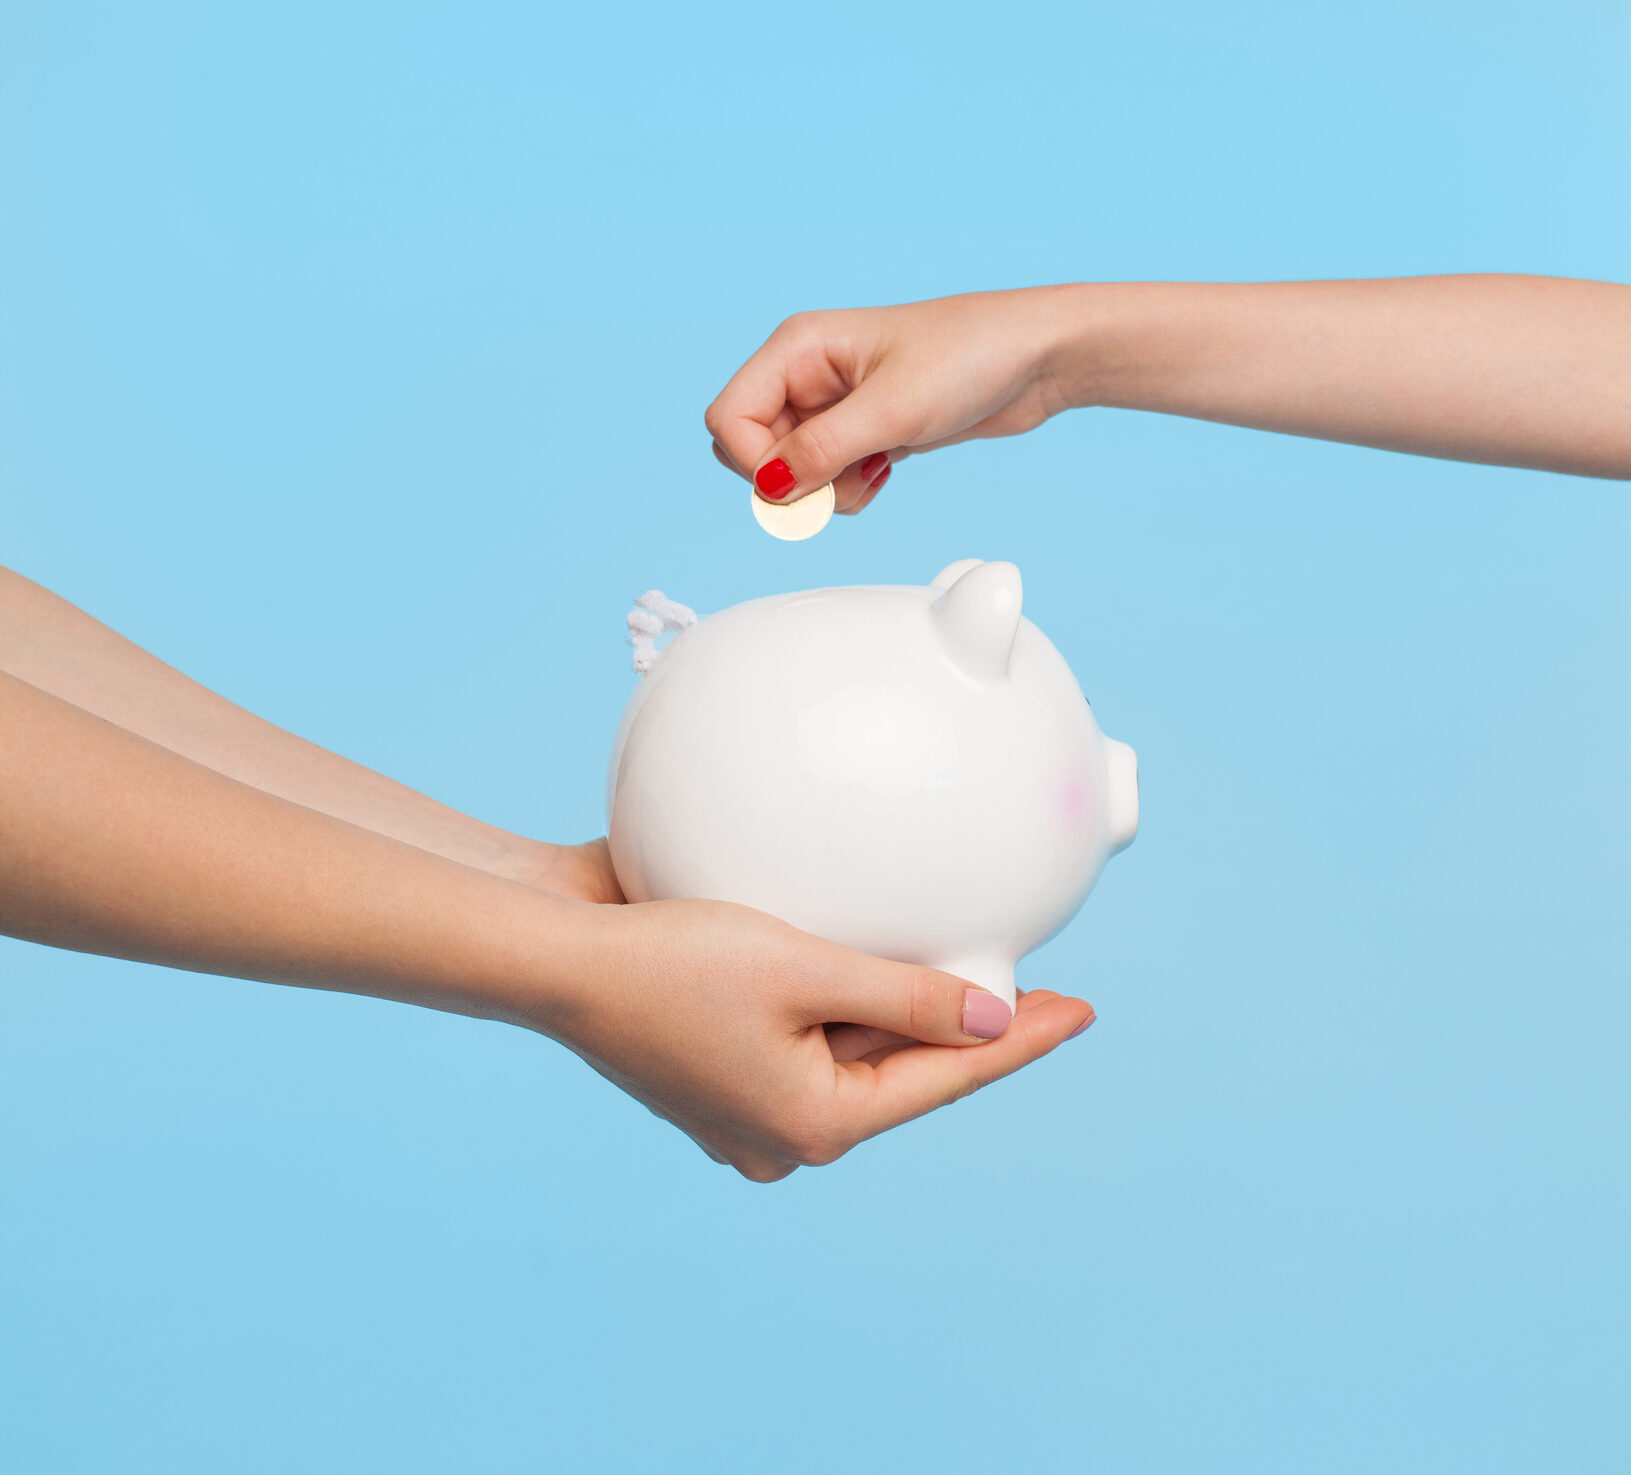 Side view of female hands holding white piggy bank and shining coin against blue background—meant to convey CGM affordability cost savings programs